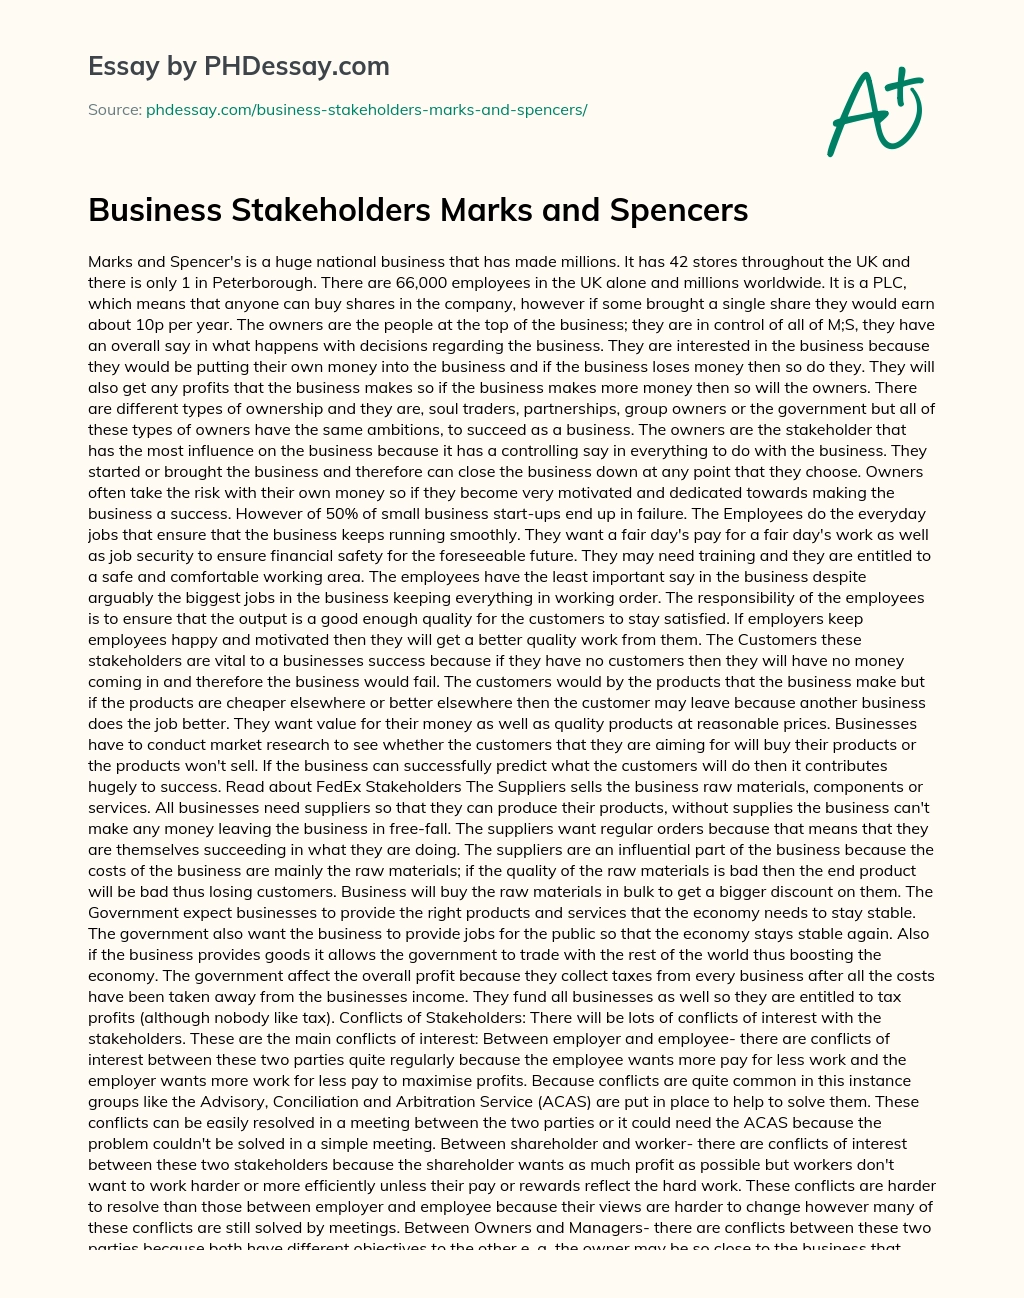 Business Stakeholders Marks and Spencers essay